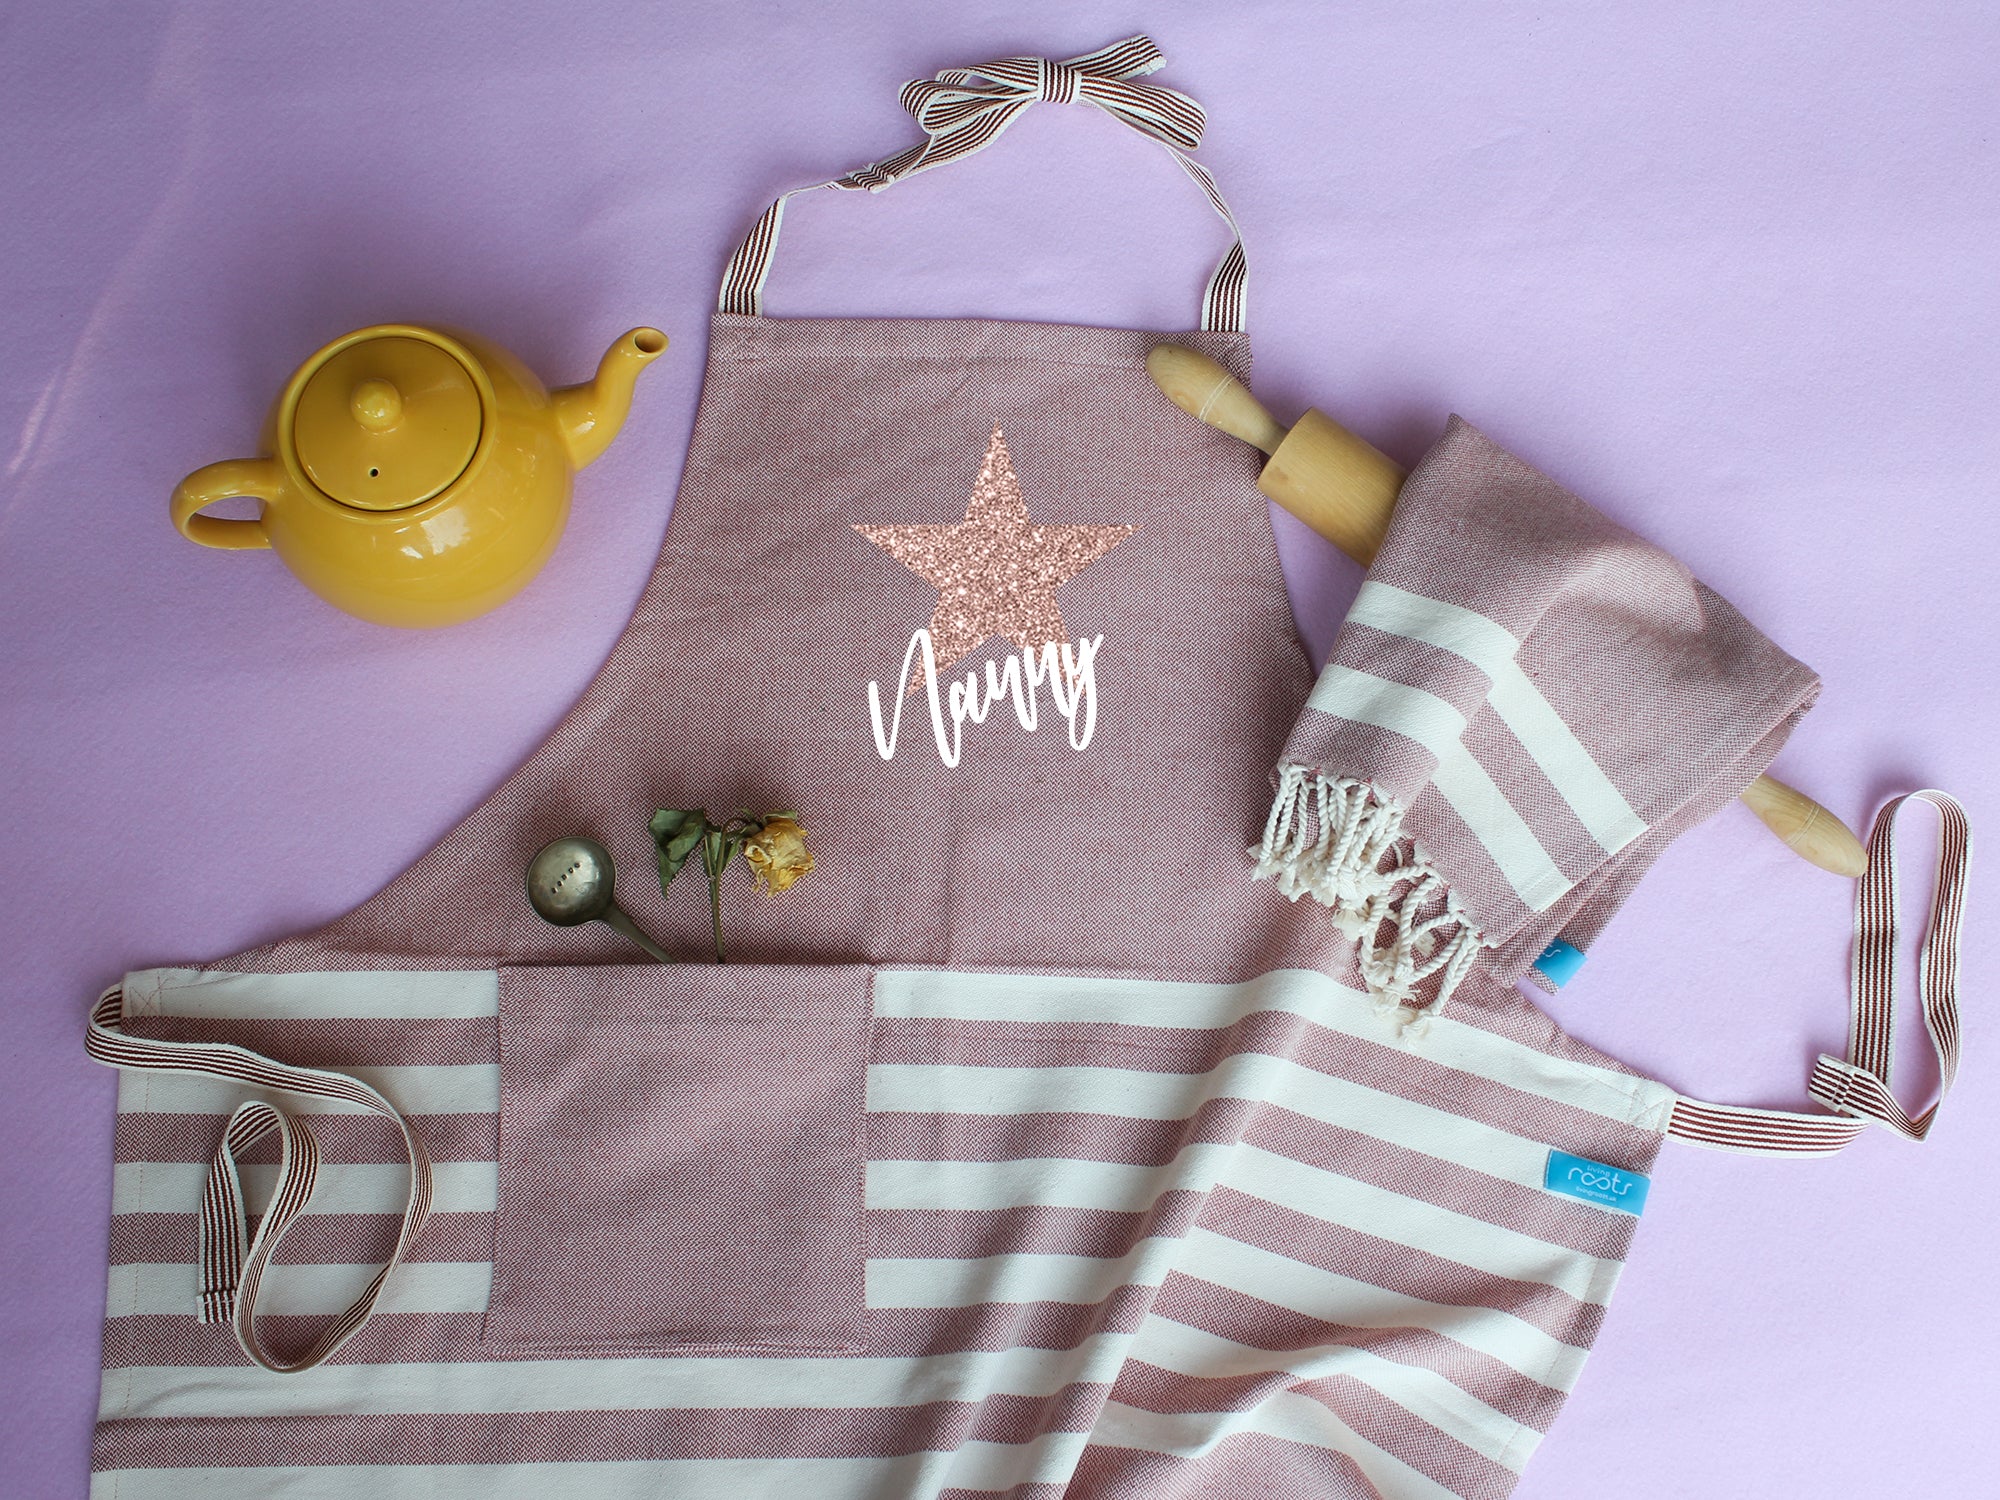 NATURE Personalised Apron and tea towels